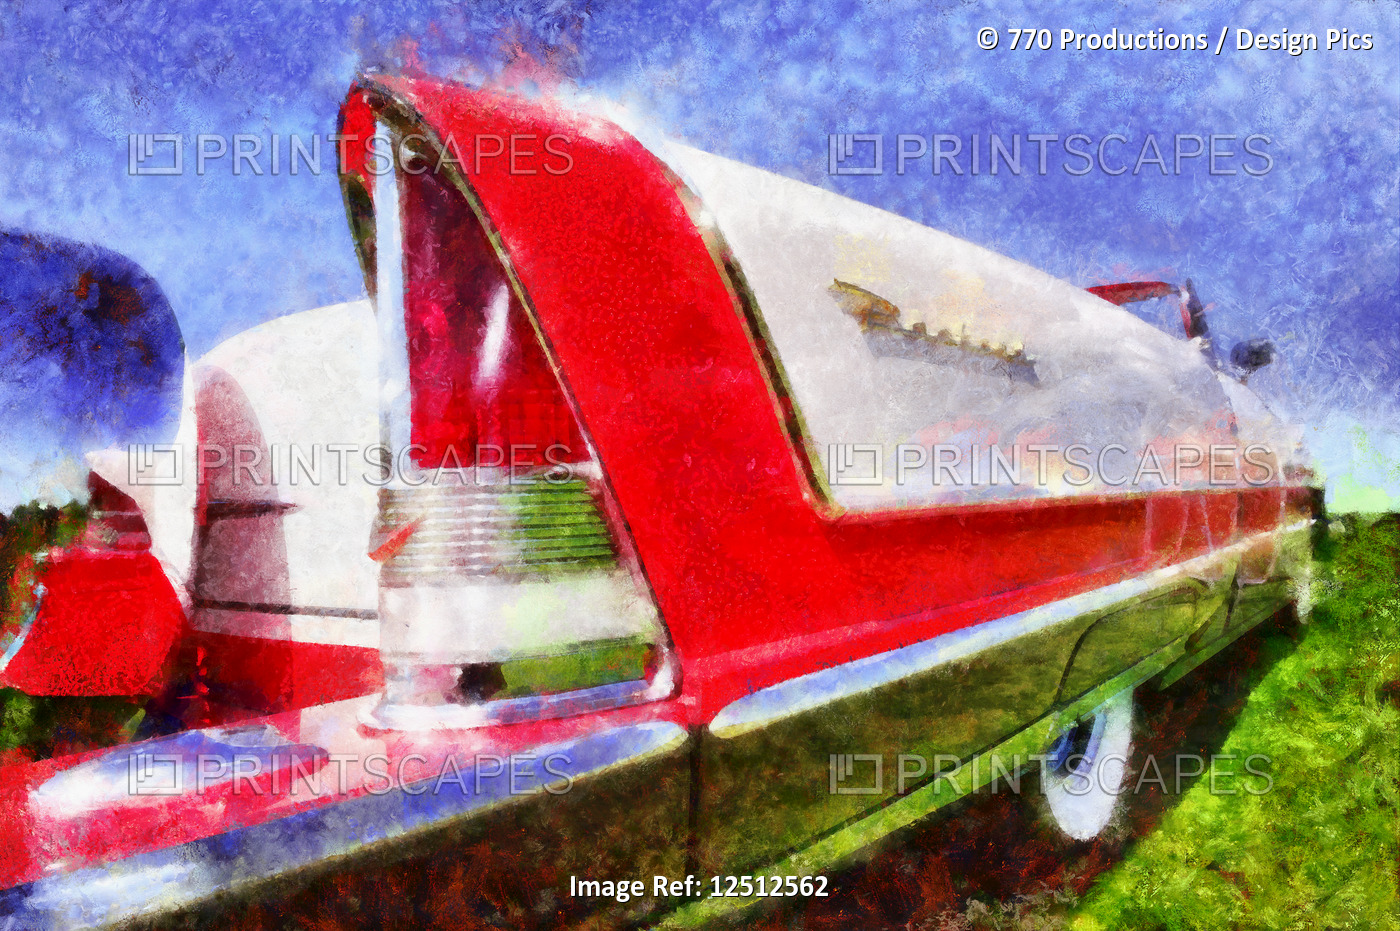 Digital painting of a red and white classic car